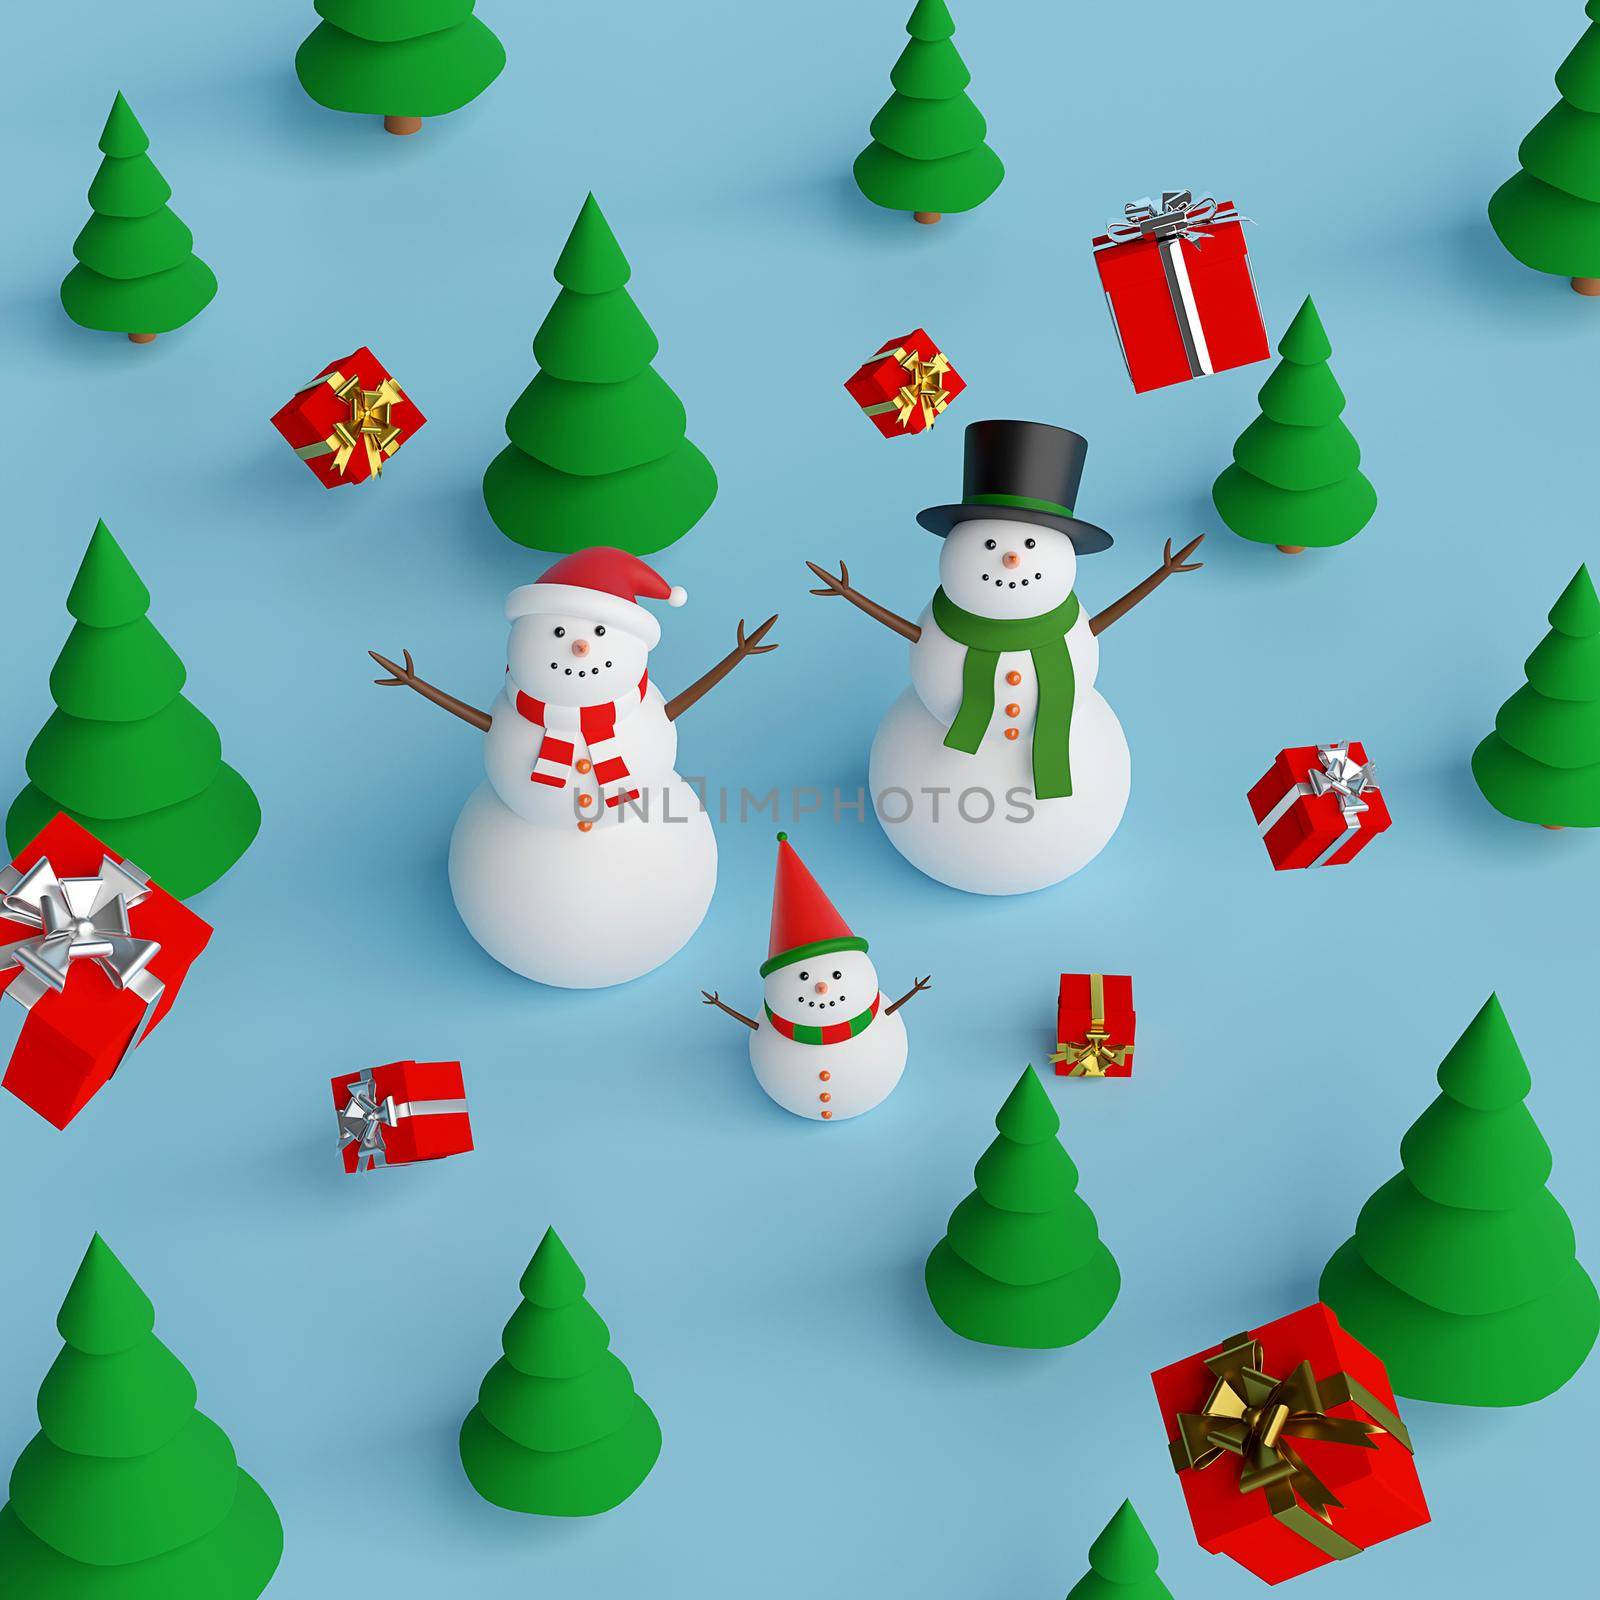 Merry Christmas and Happy New Year, Snowman in pine forest with Christmas gifts, 3d rendering